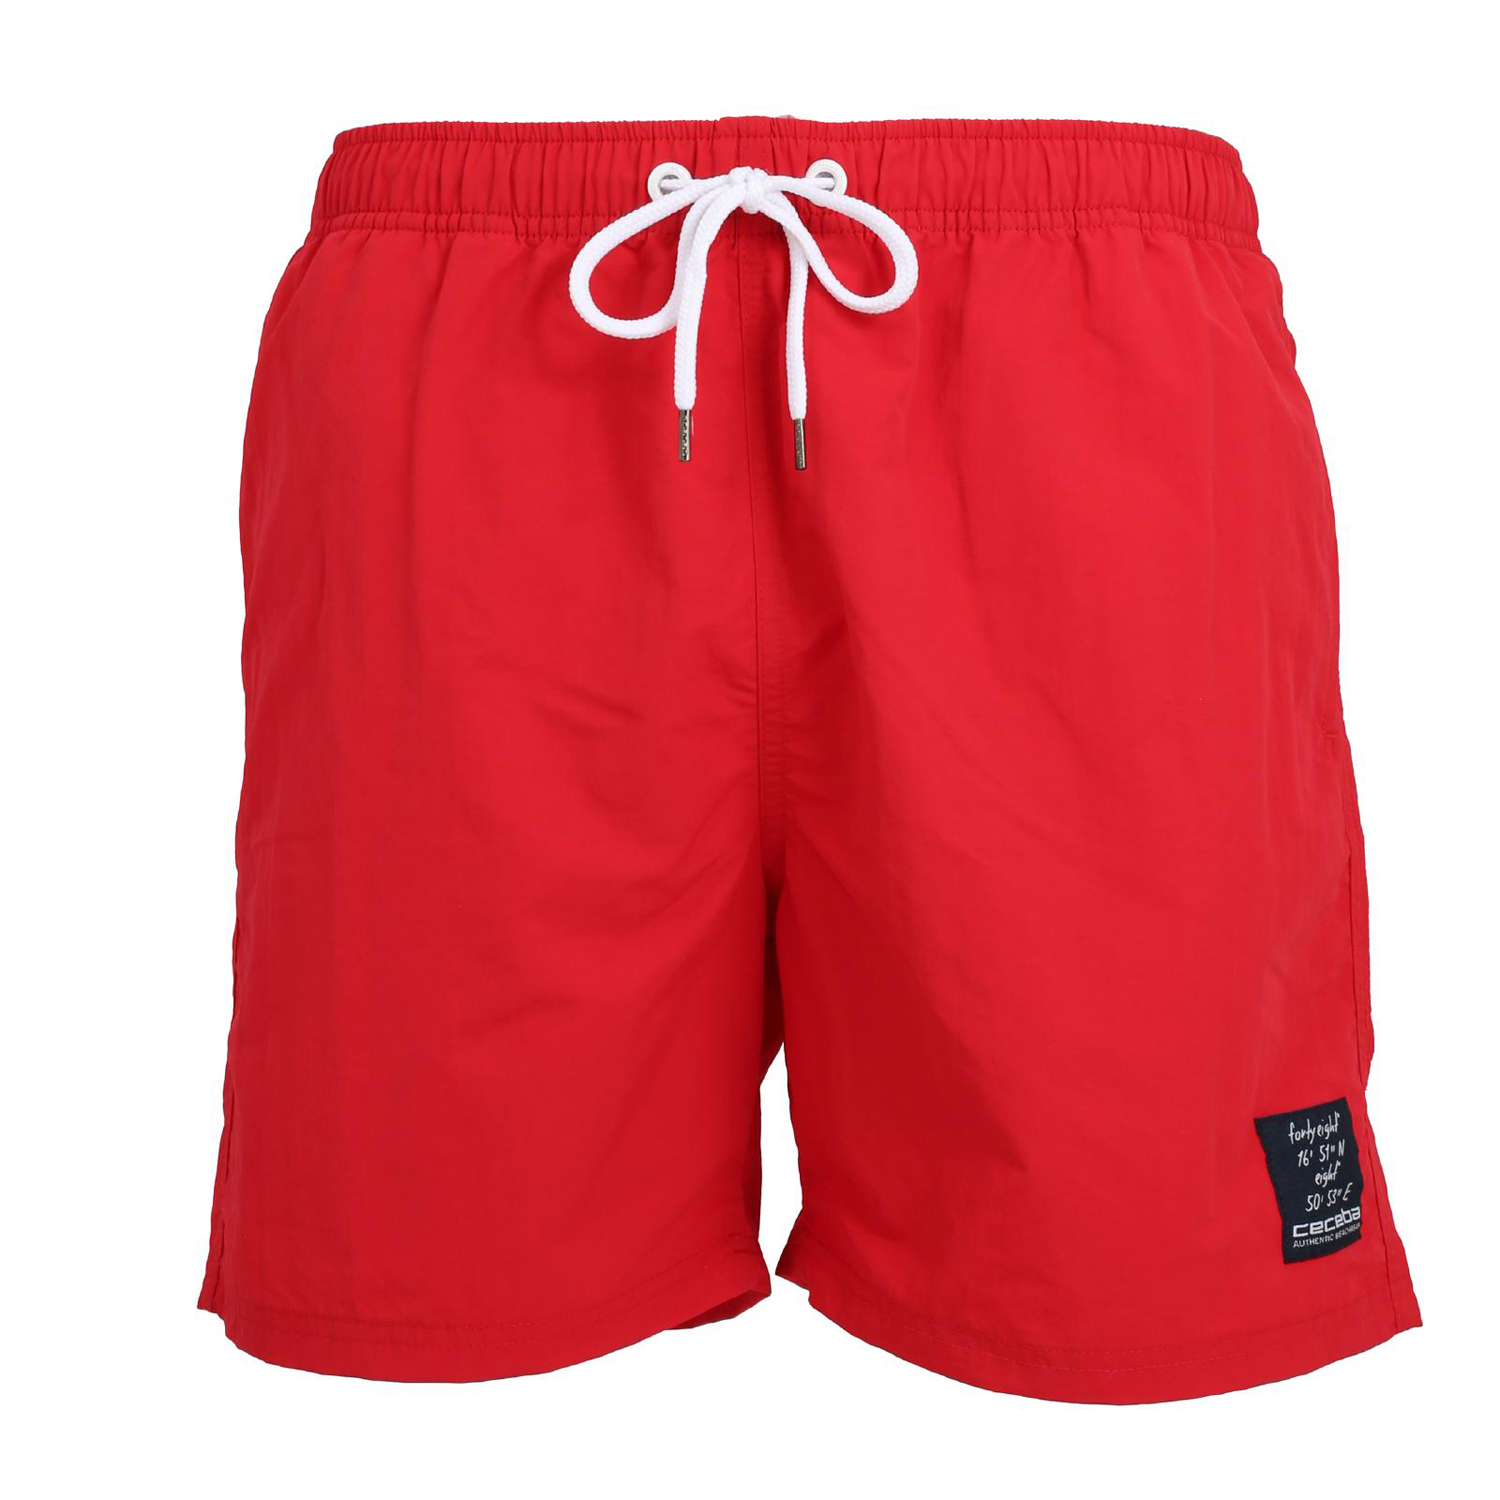 Swim shorts in red by Ceceba up to oversize 7XL